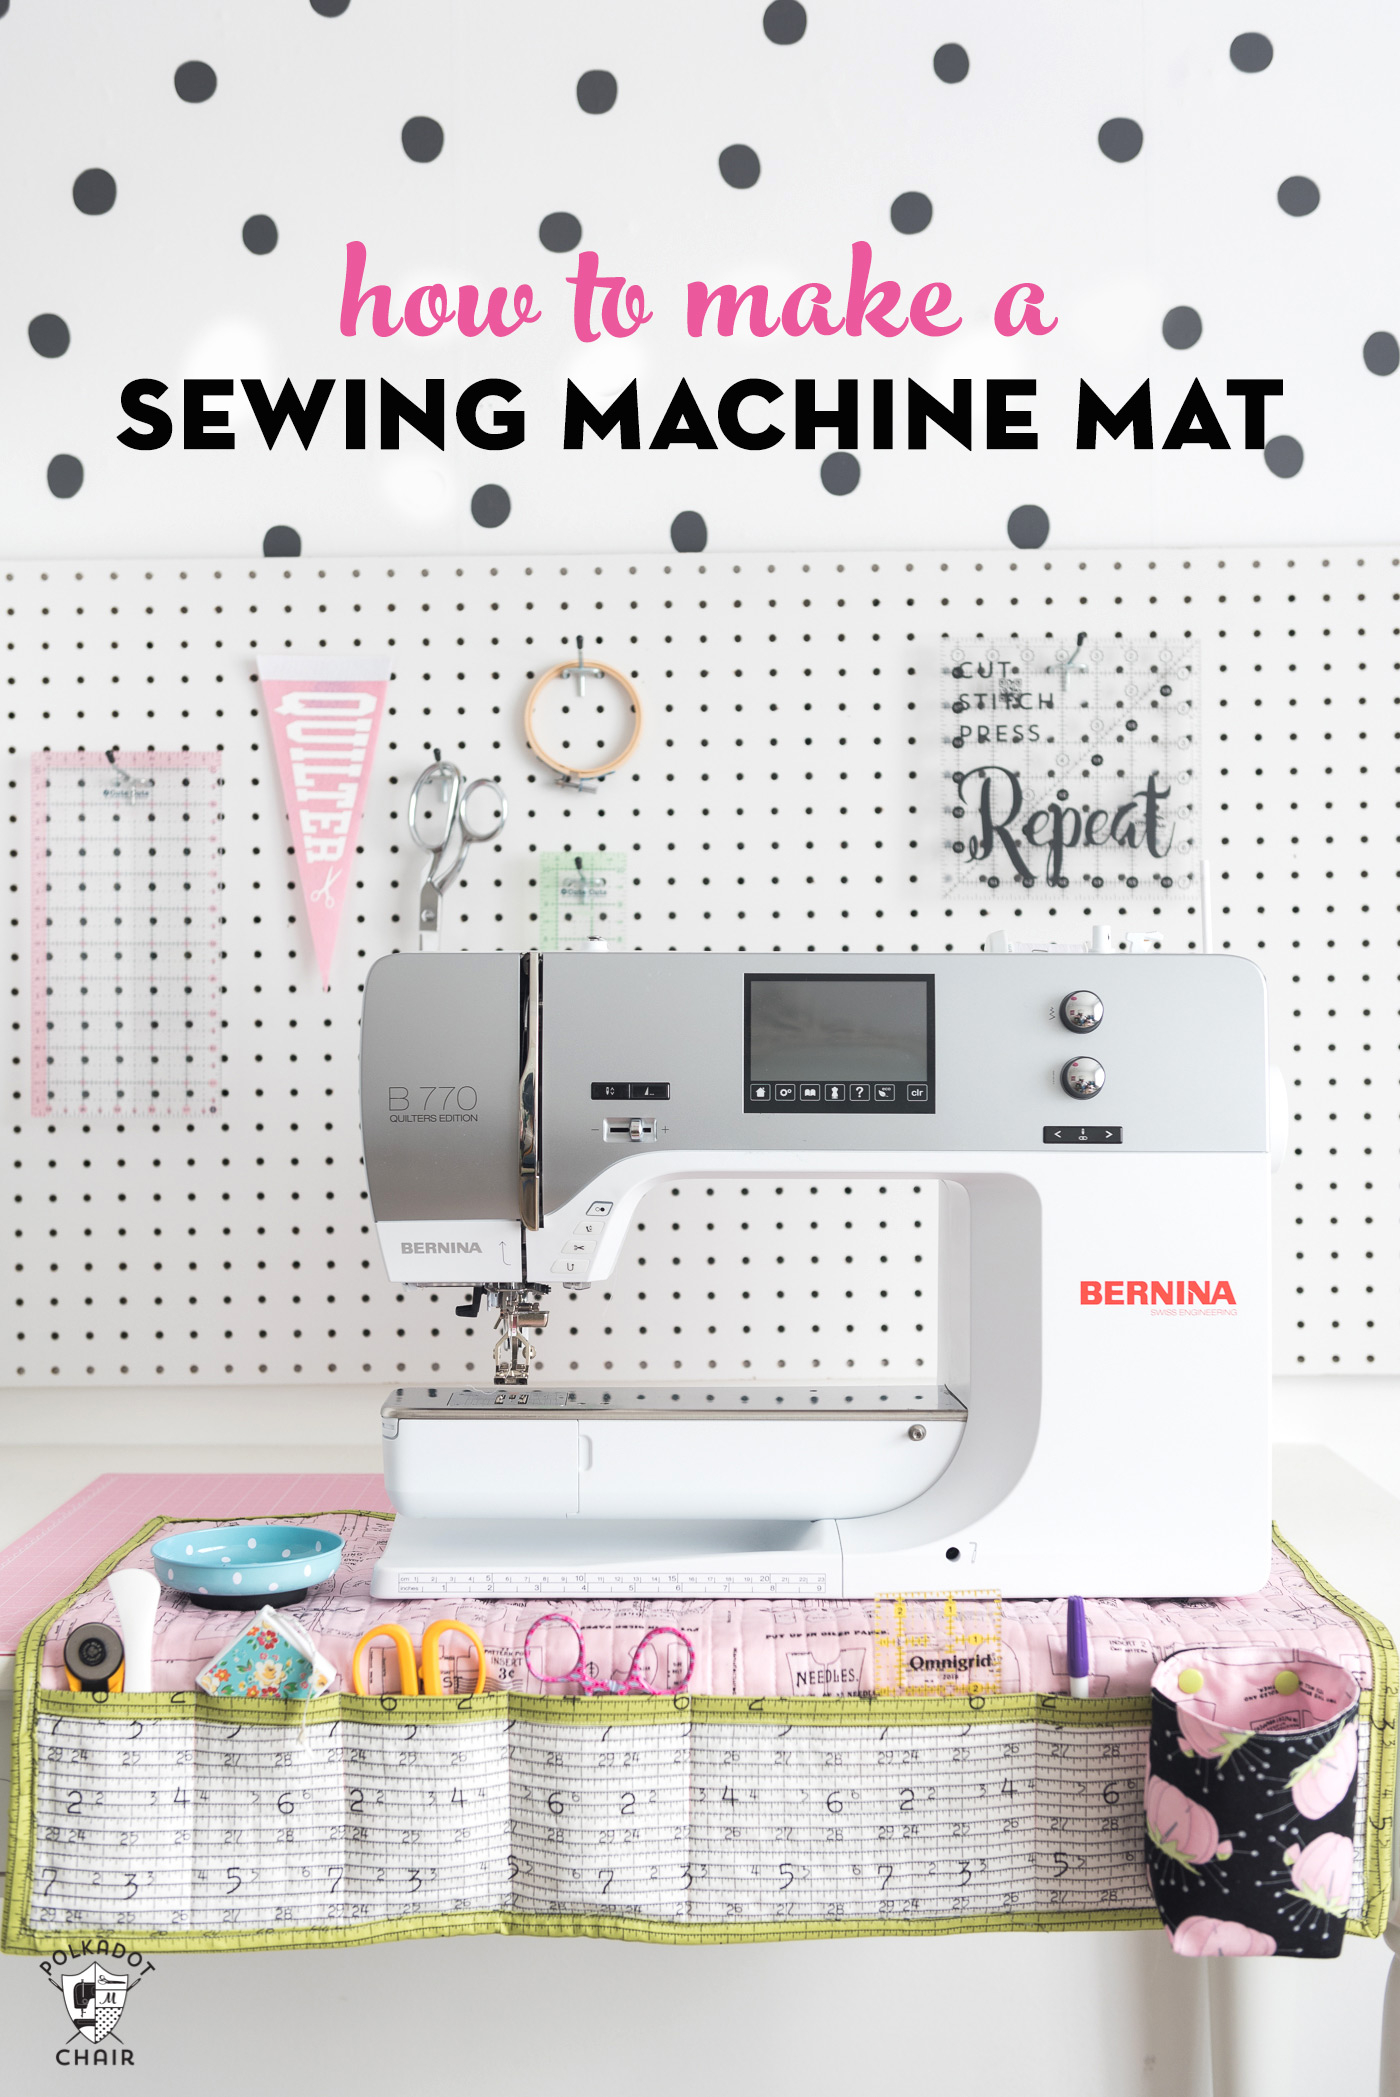 Free Embroidery Machine Patterns Stay Organized With This Diy Sewing Machine Mat The Polka Dot Chair